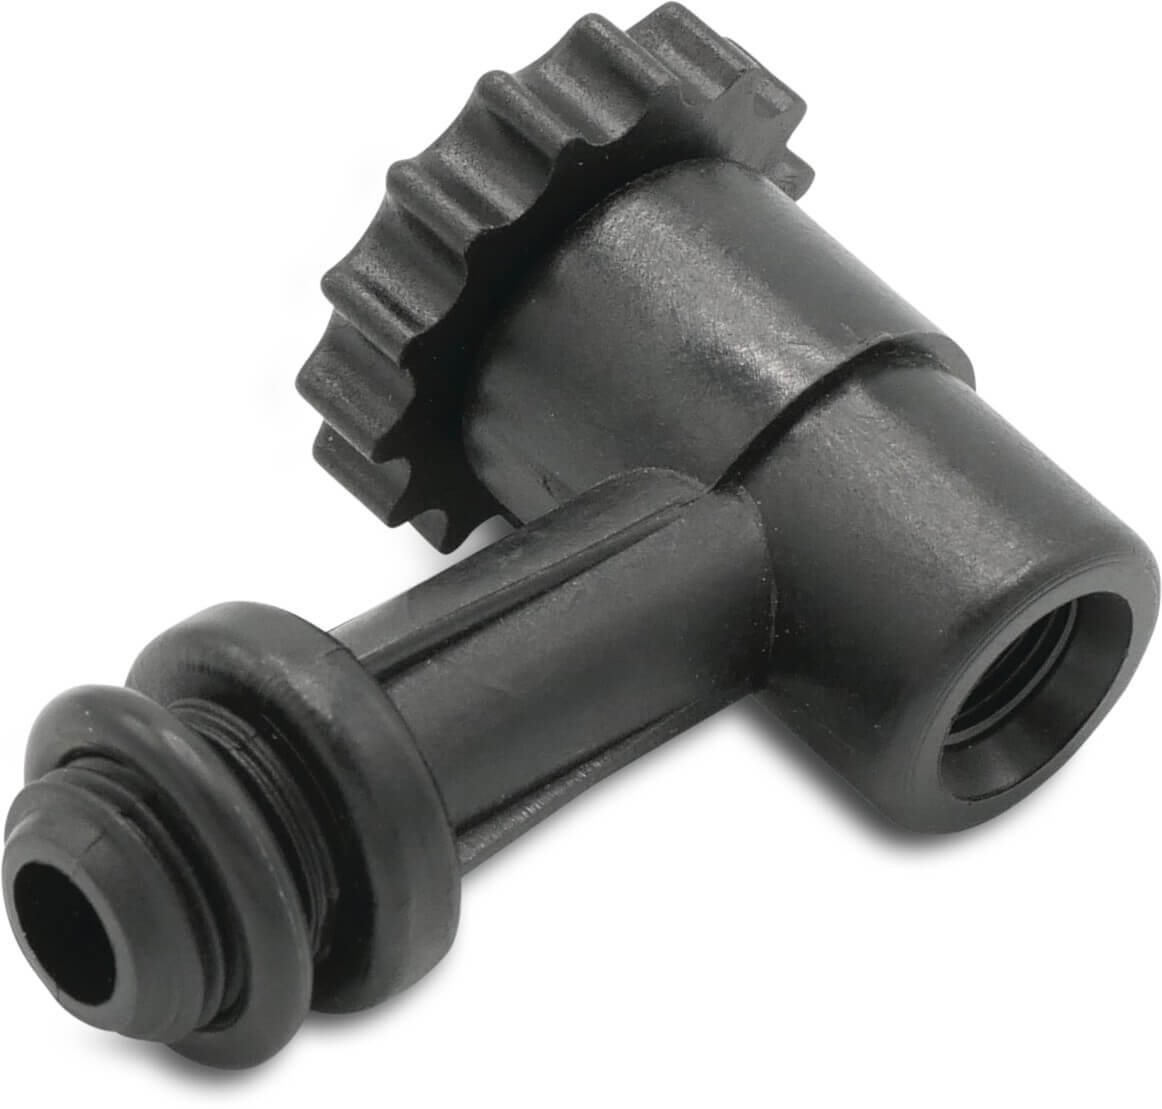 Air release valve angled plastic with pressure gauge connection female thread 1/8"